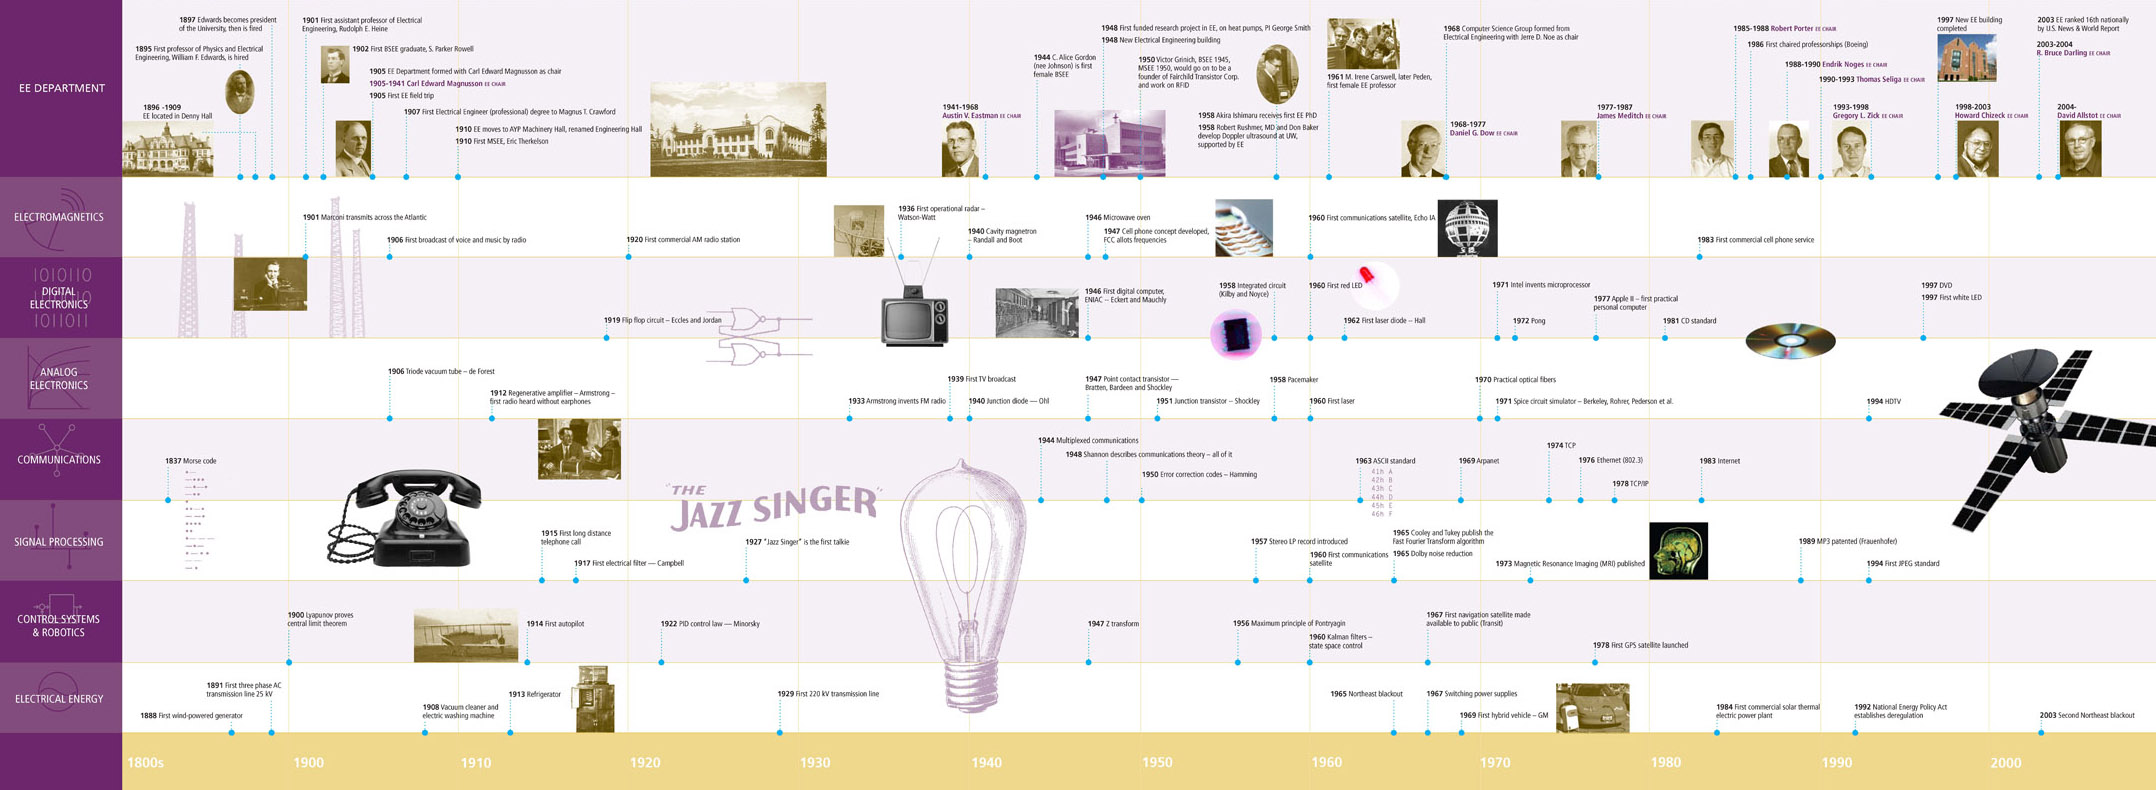 graphical timeline of the last 100 years of electrical engineering innovation